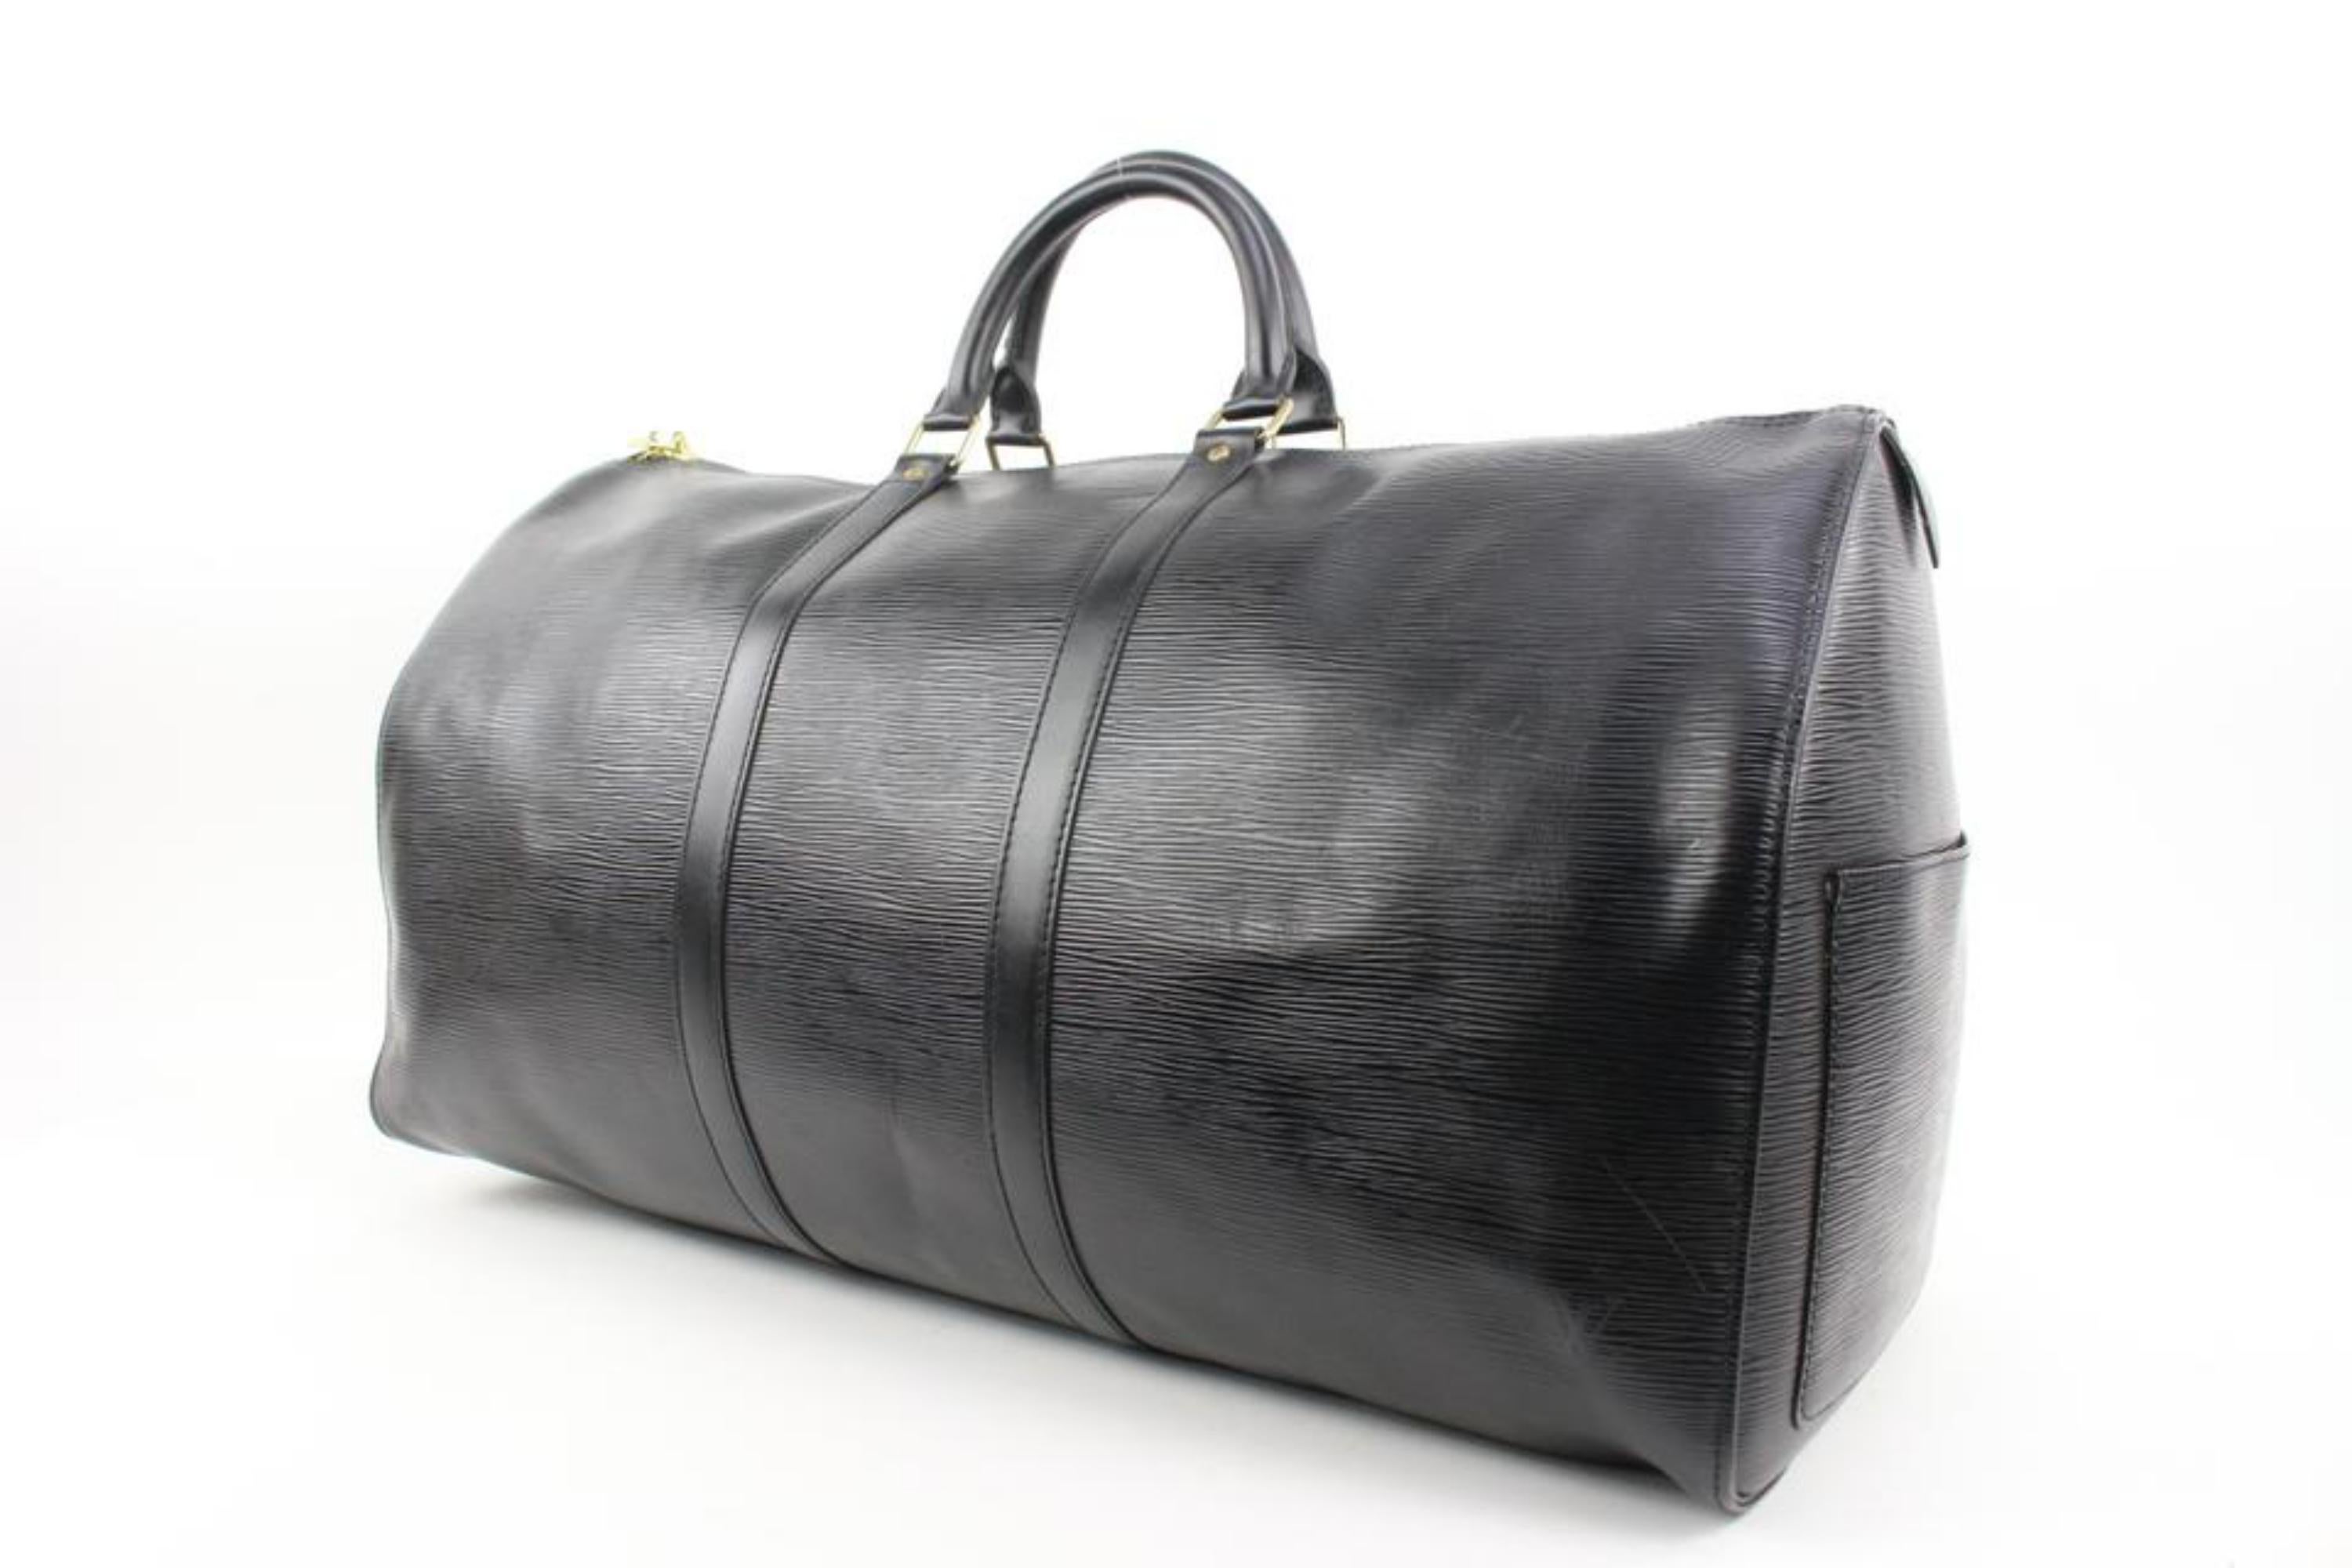 Louis Vuitton Black Epi Leather Noir Keepall 55 Duffle Bag 45lv224s
Date Code/Serial Number: SP0965
Made In: France
Measurements: Length:  22.5